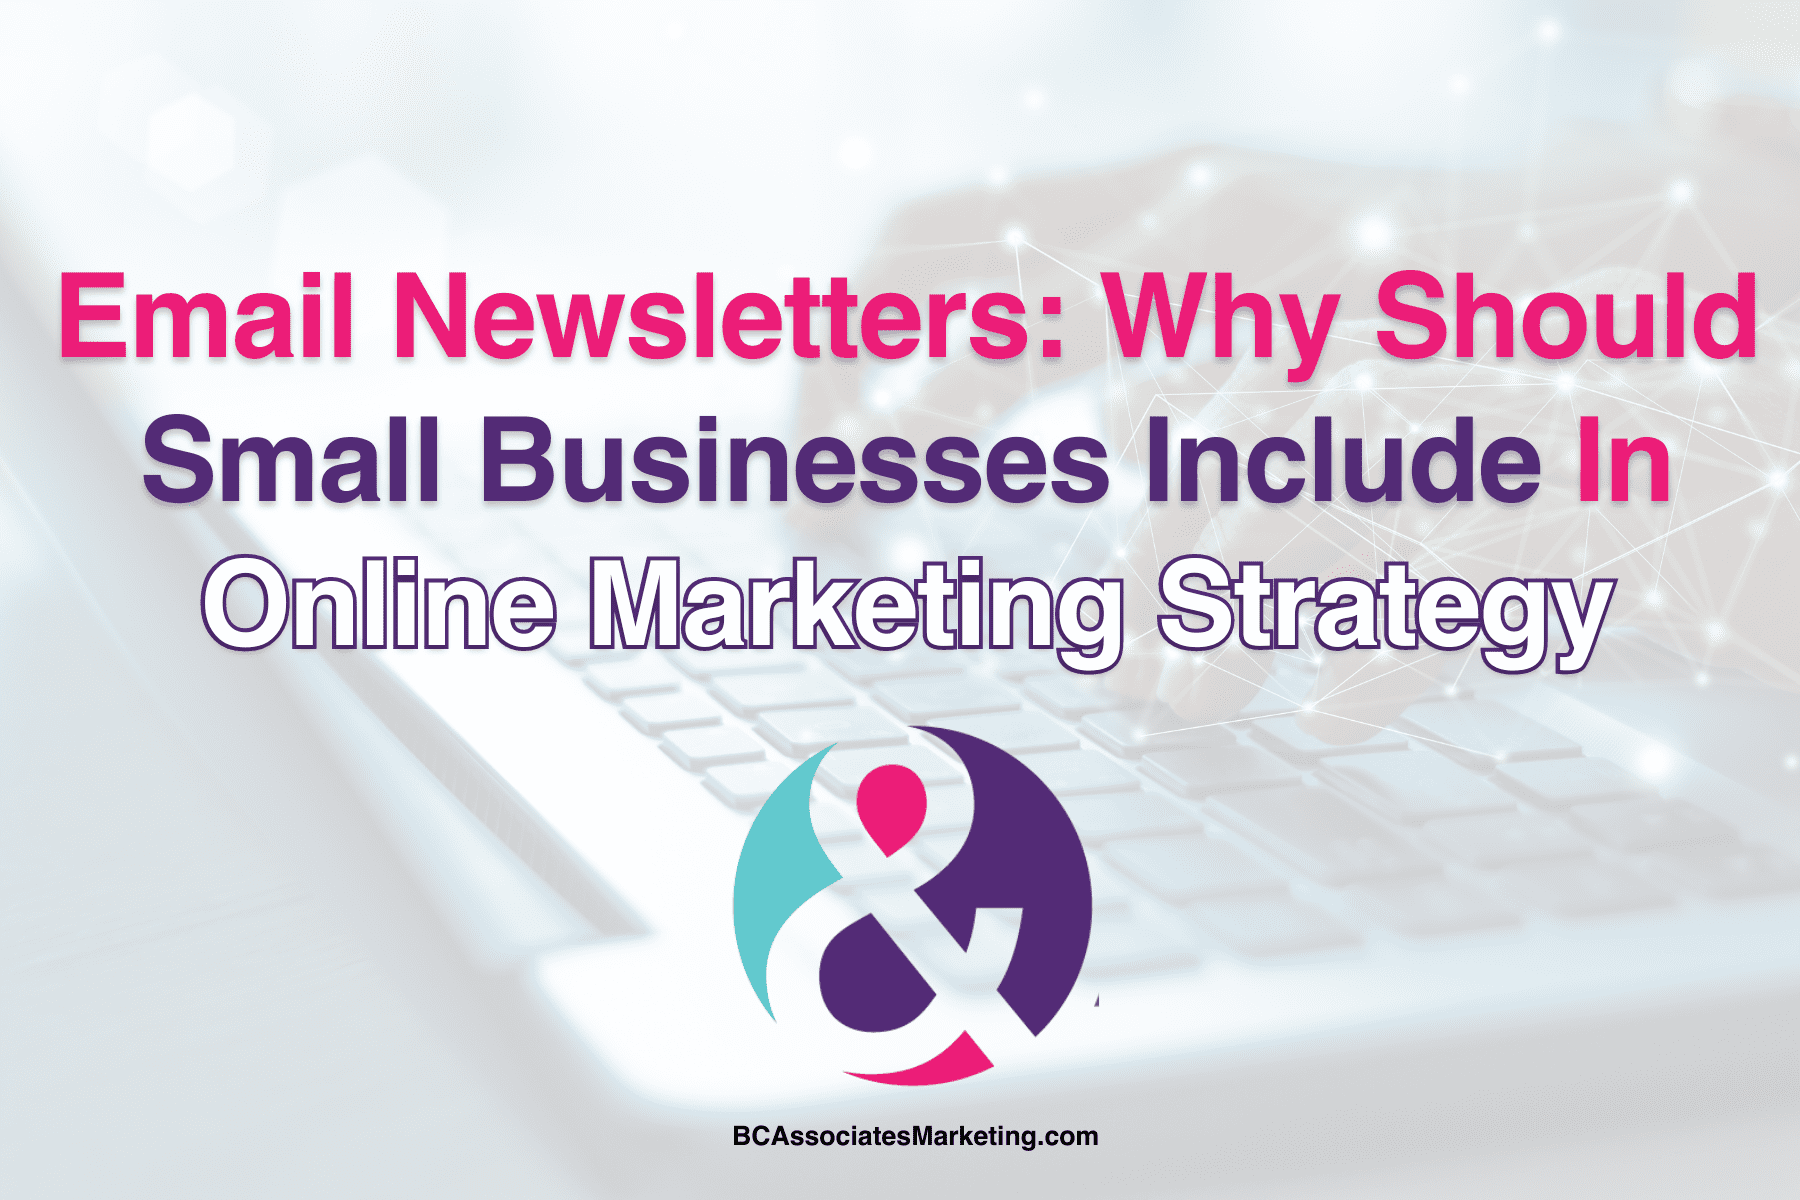 Email Newsletters: Why Should Small Businesses Include In Online Marketing Strategy